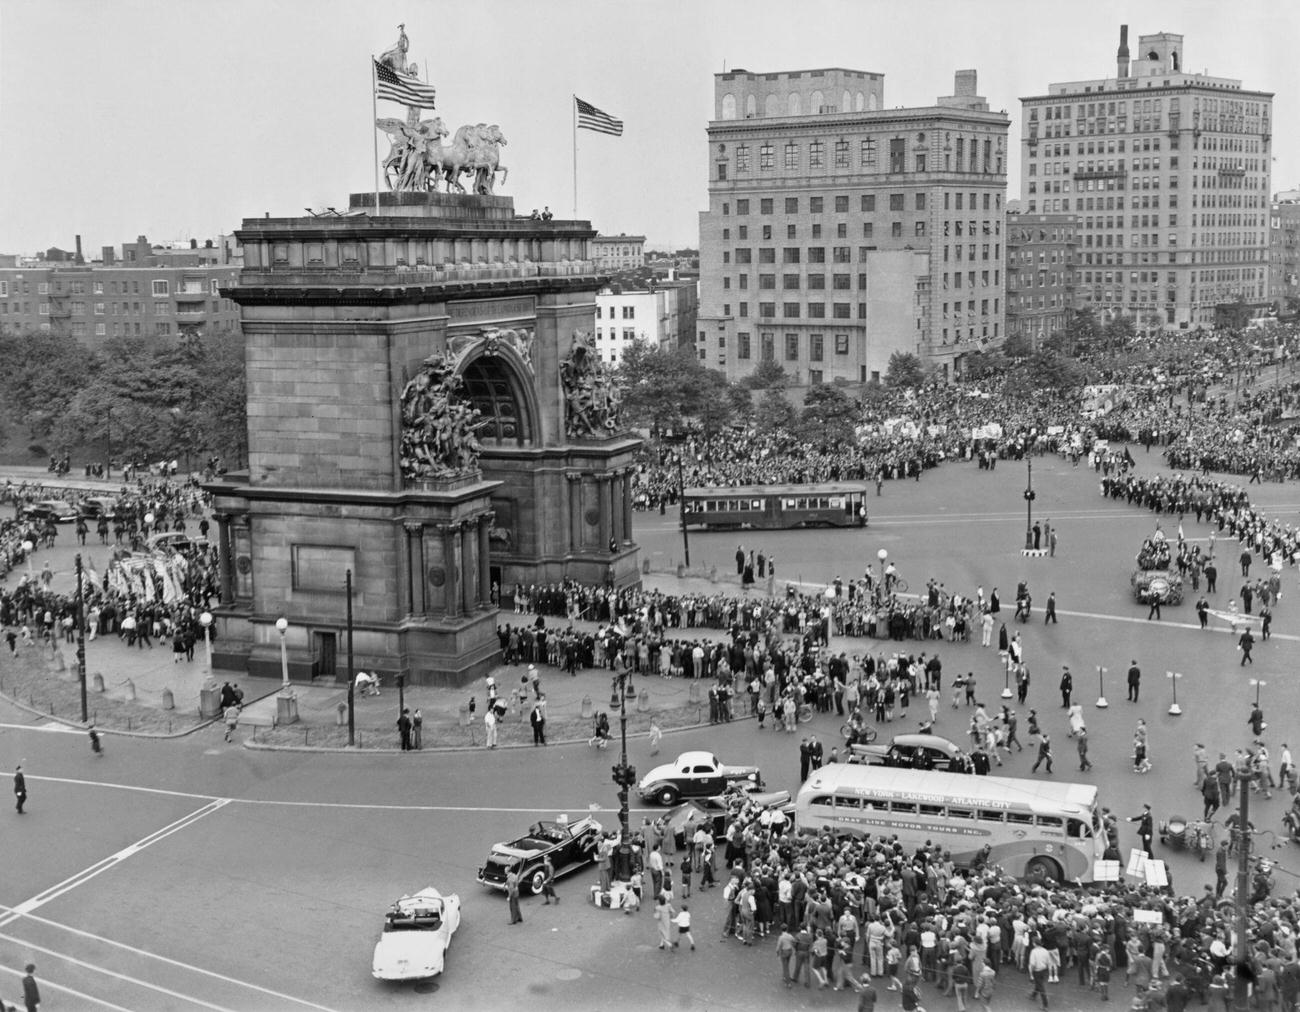 Brooklyn Dodgers Fans Celebrating Victory At Soldiers' And Sailors' Arch, Grand Army Plaza, 1941